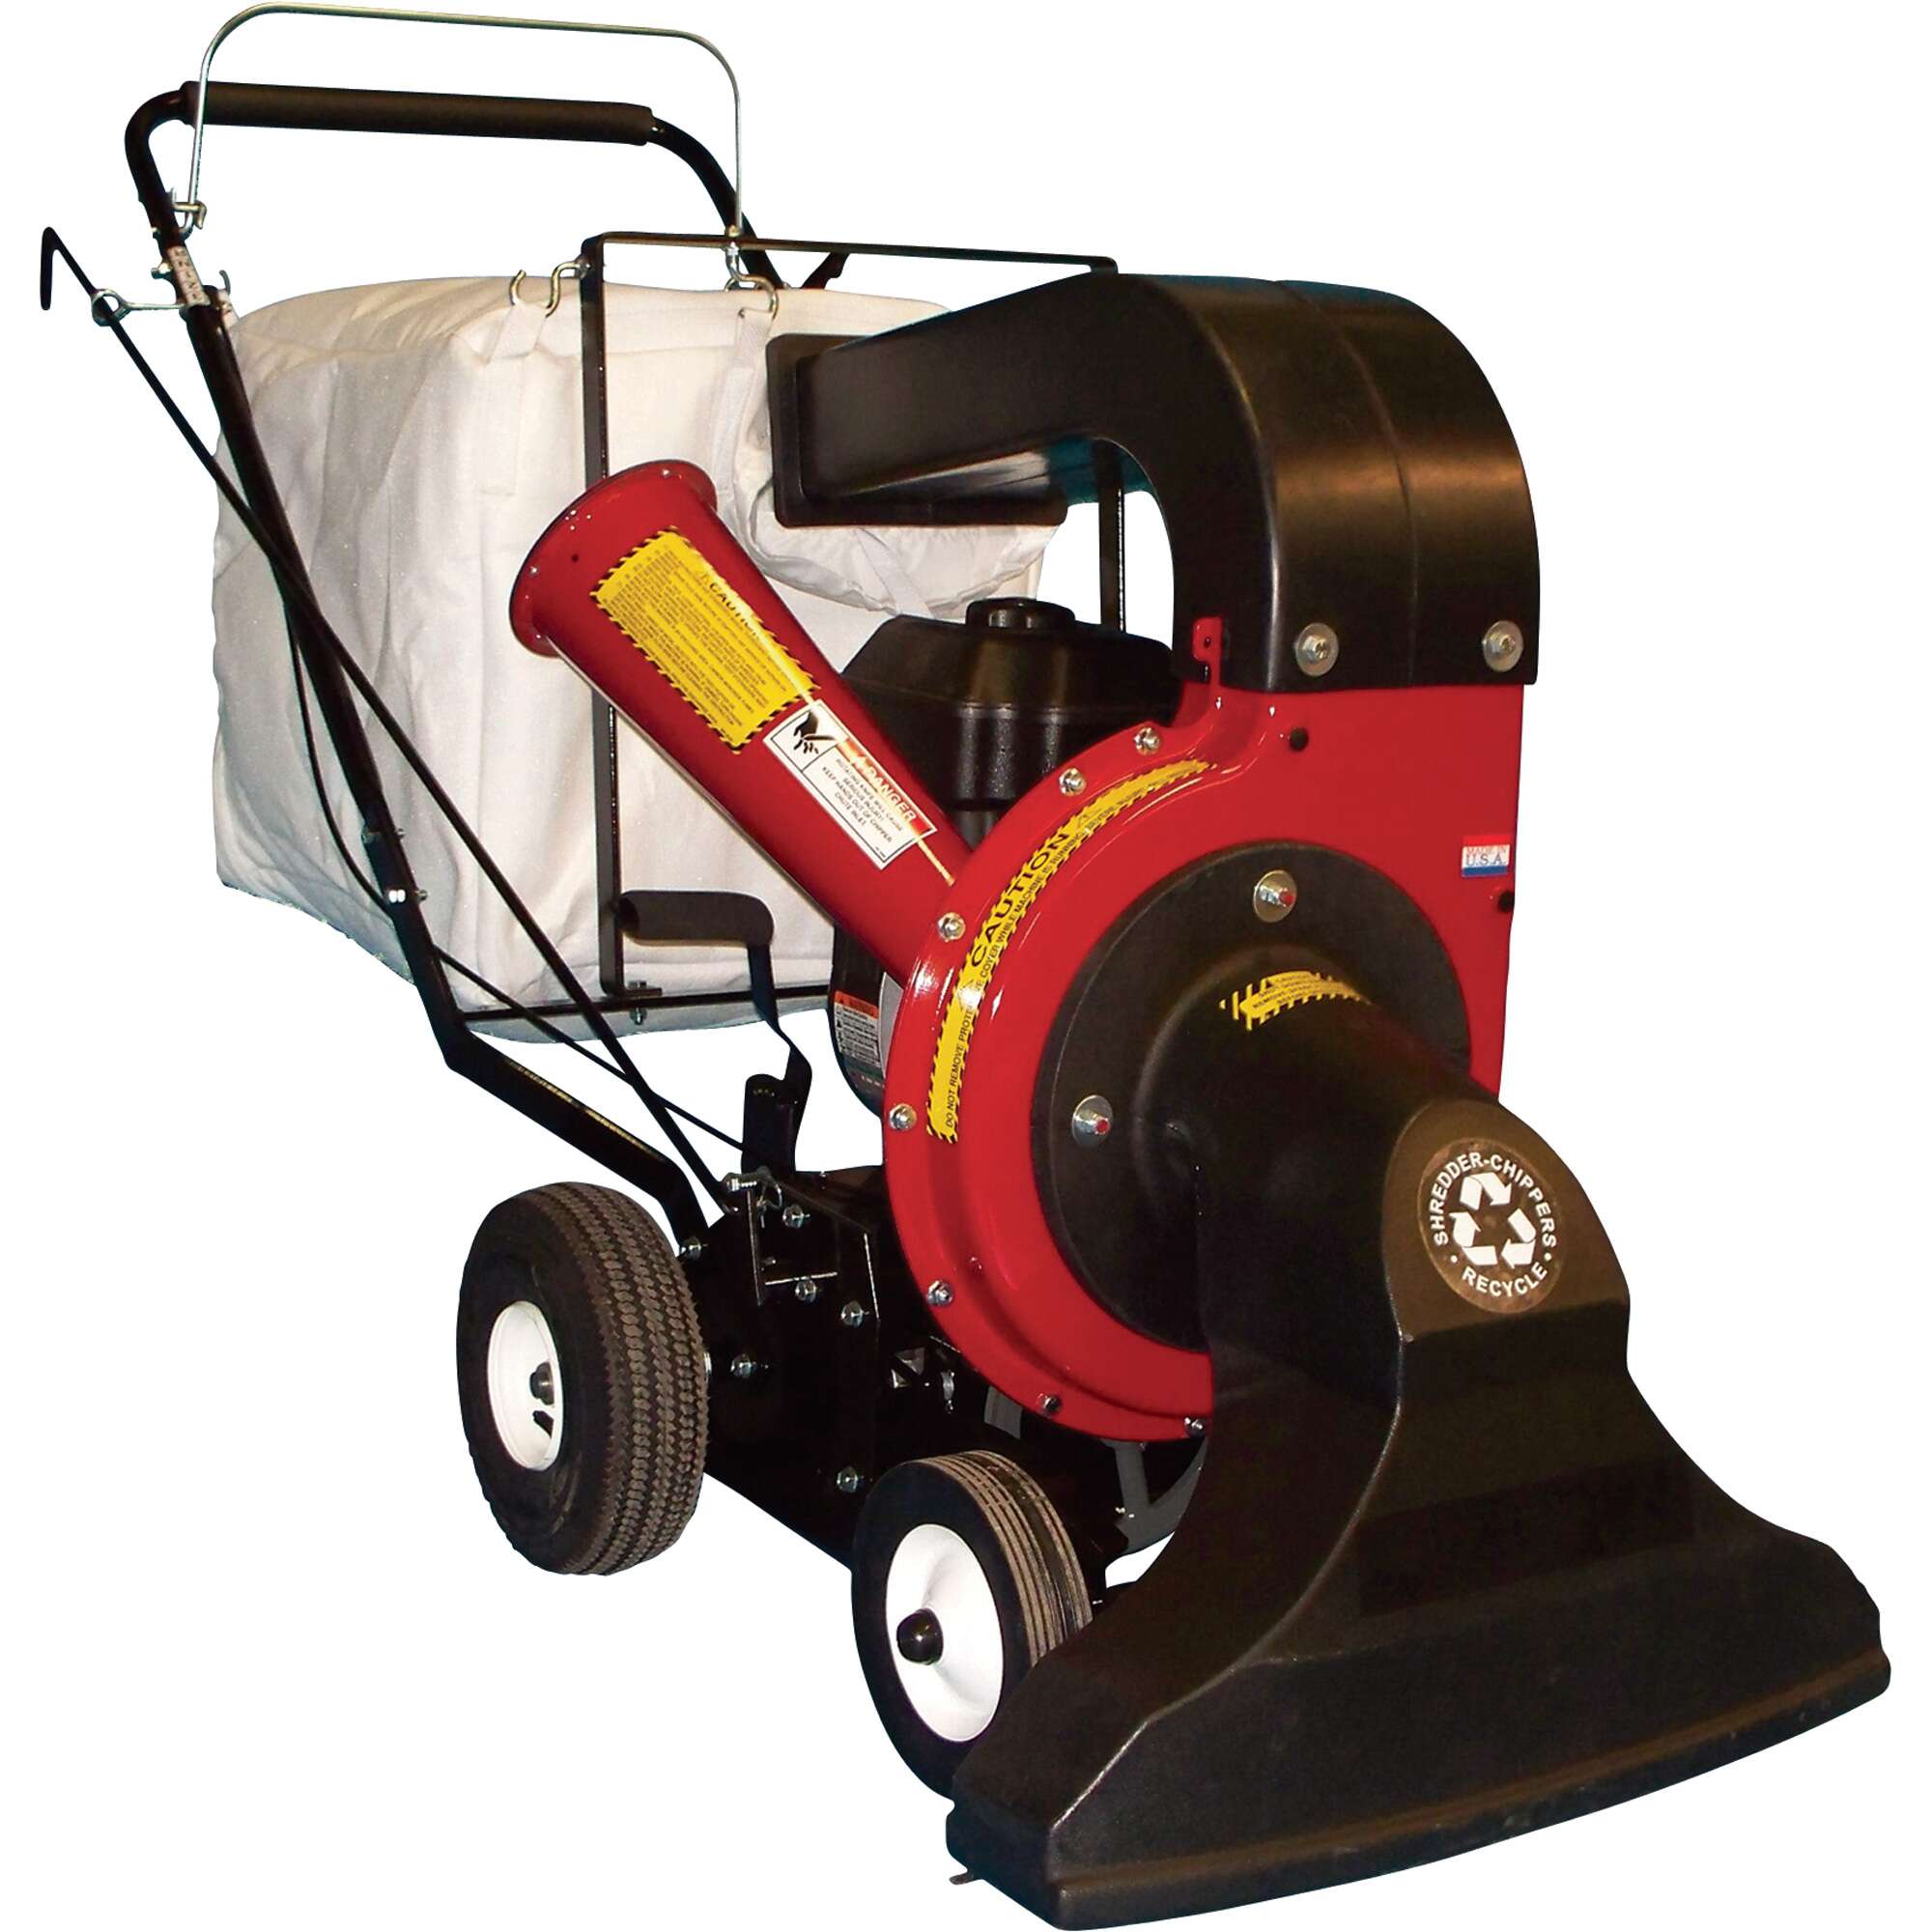 Merry Mac Walk Behind Vacuum Chipper Bagger 250cc Briggs & Stratton 1150 Series OHV Engine with Electric Start